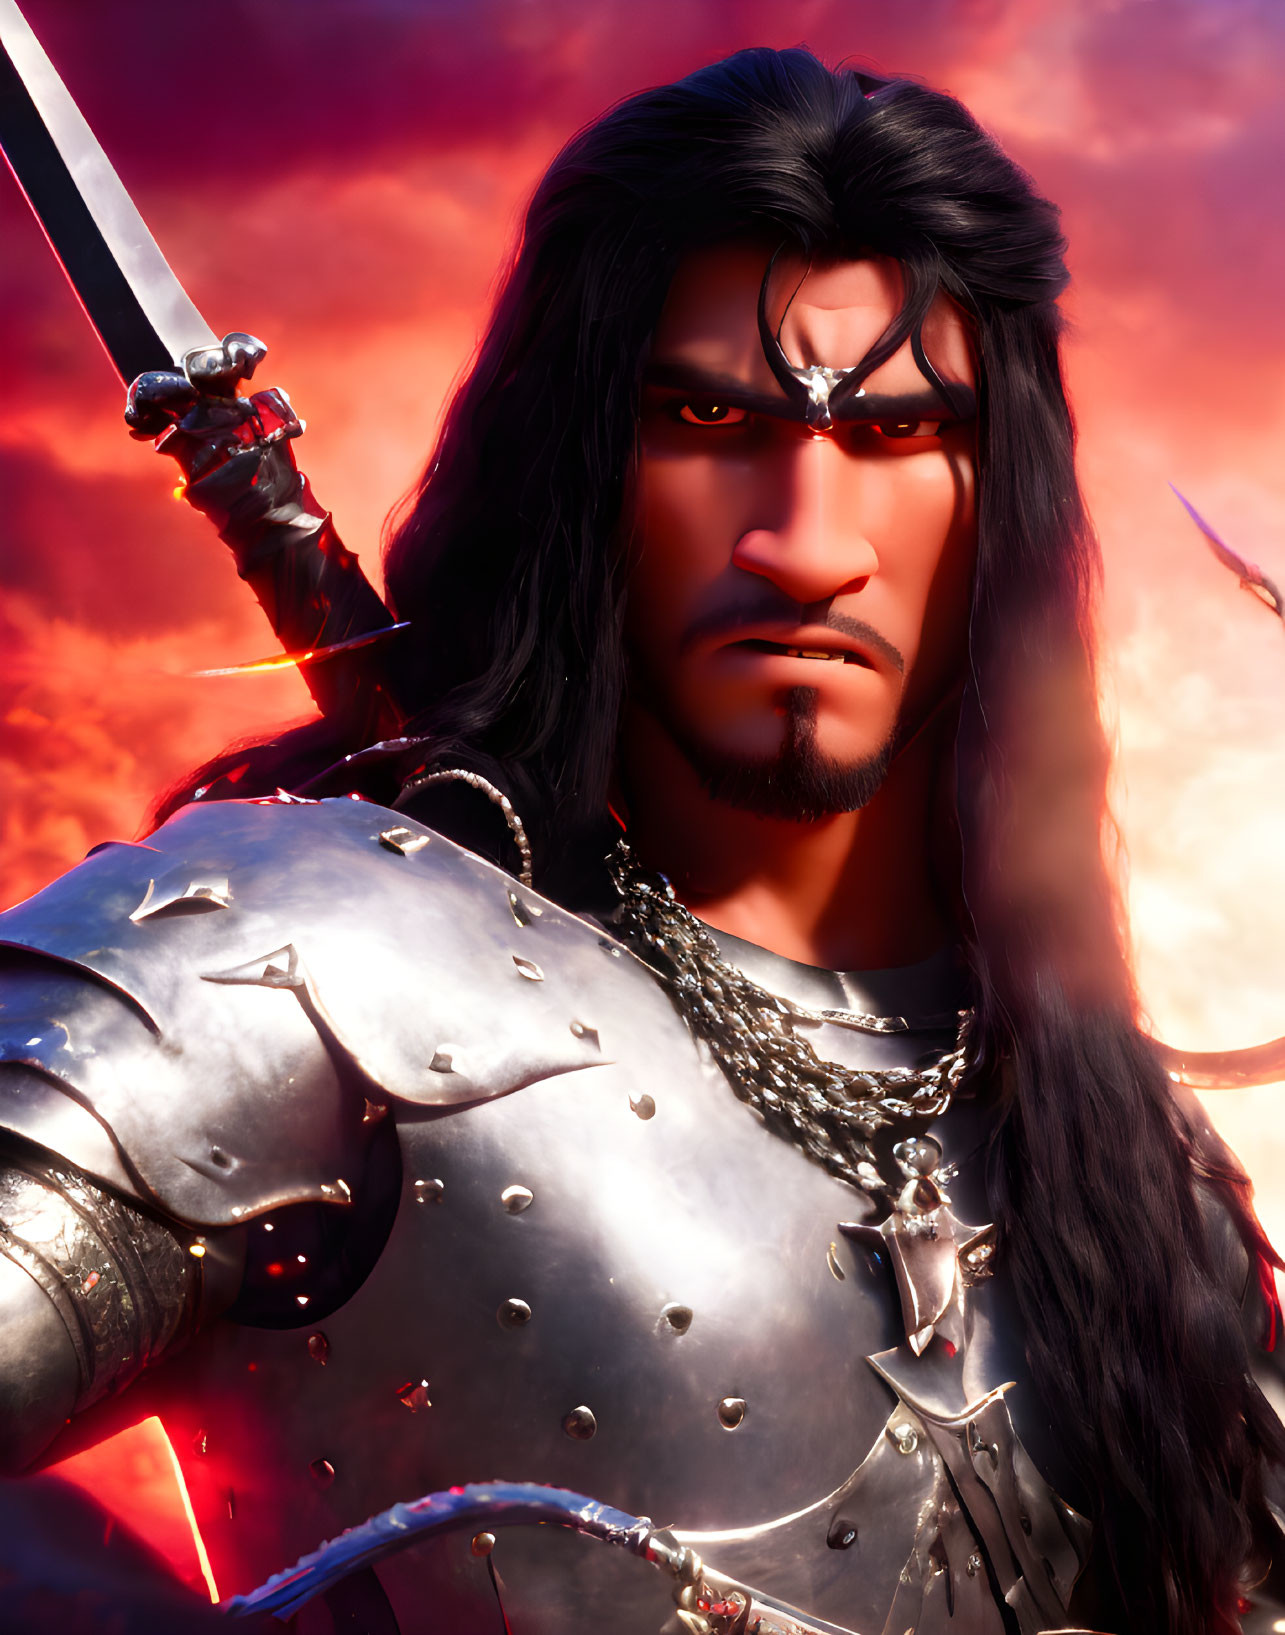 Animated knight with black hair, silver armor, sword, and fiery backdrop